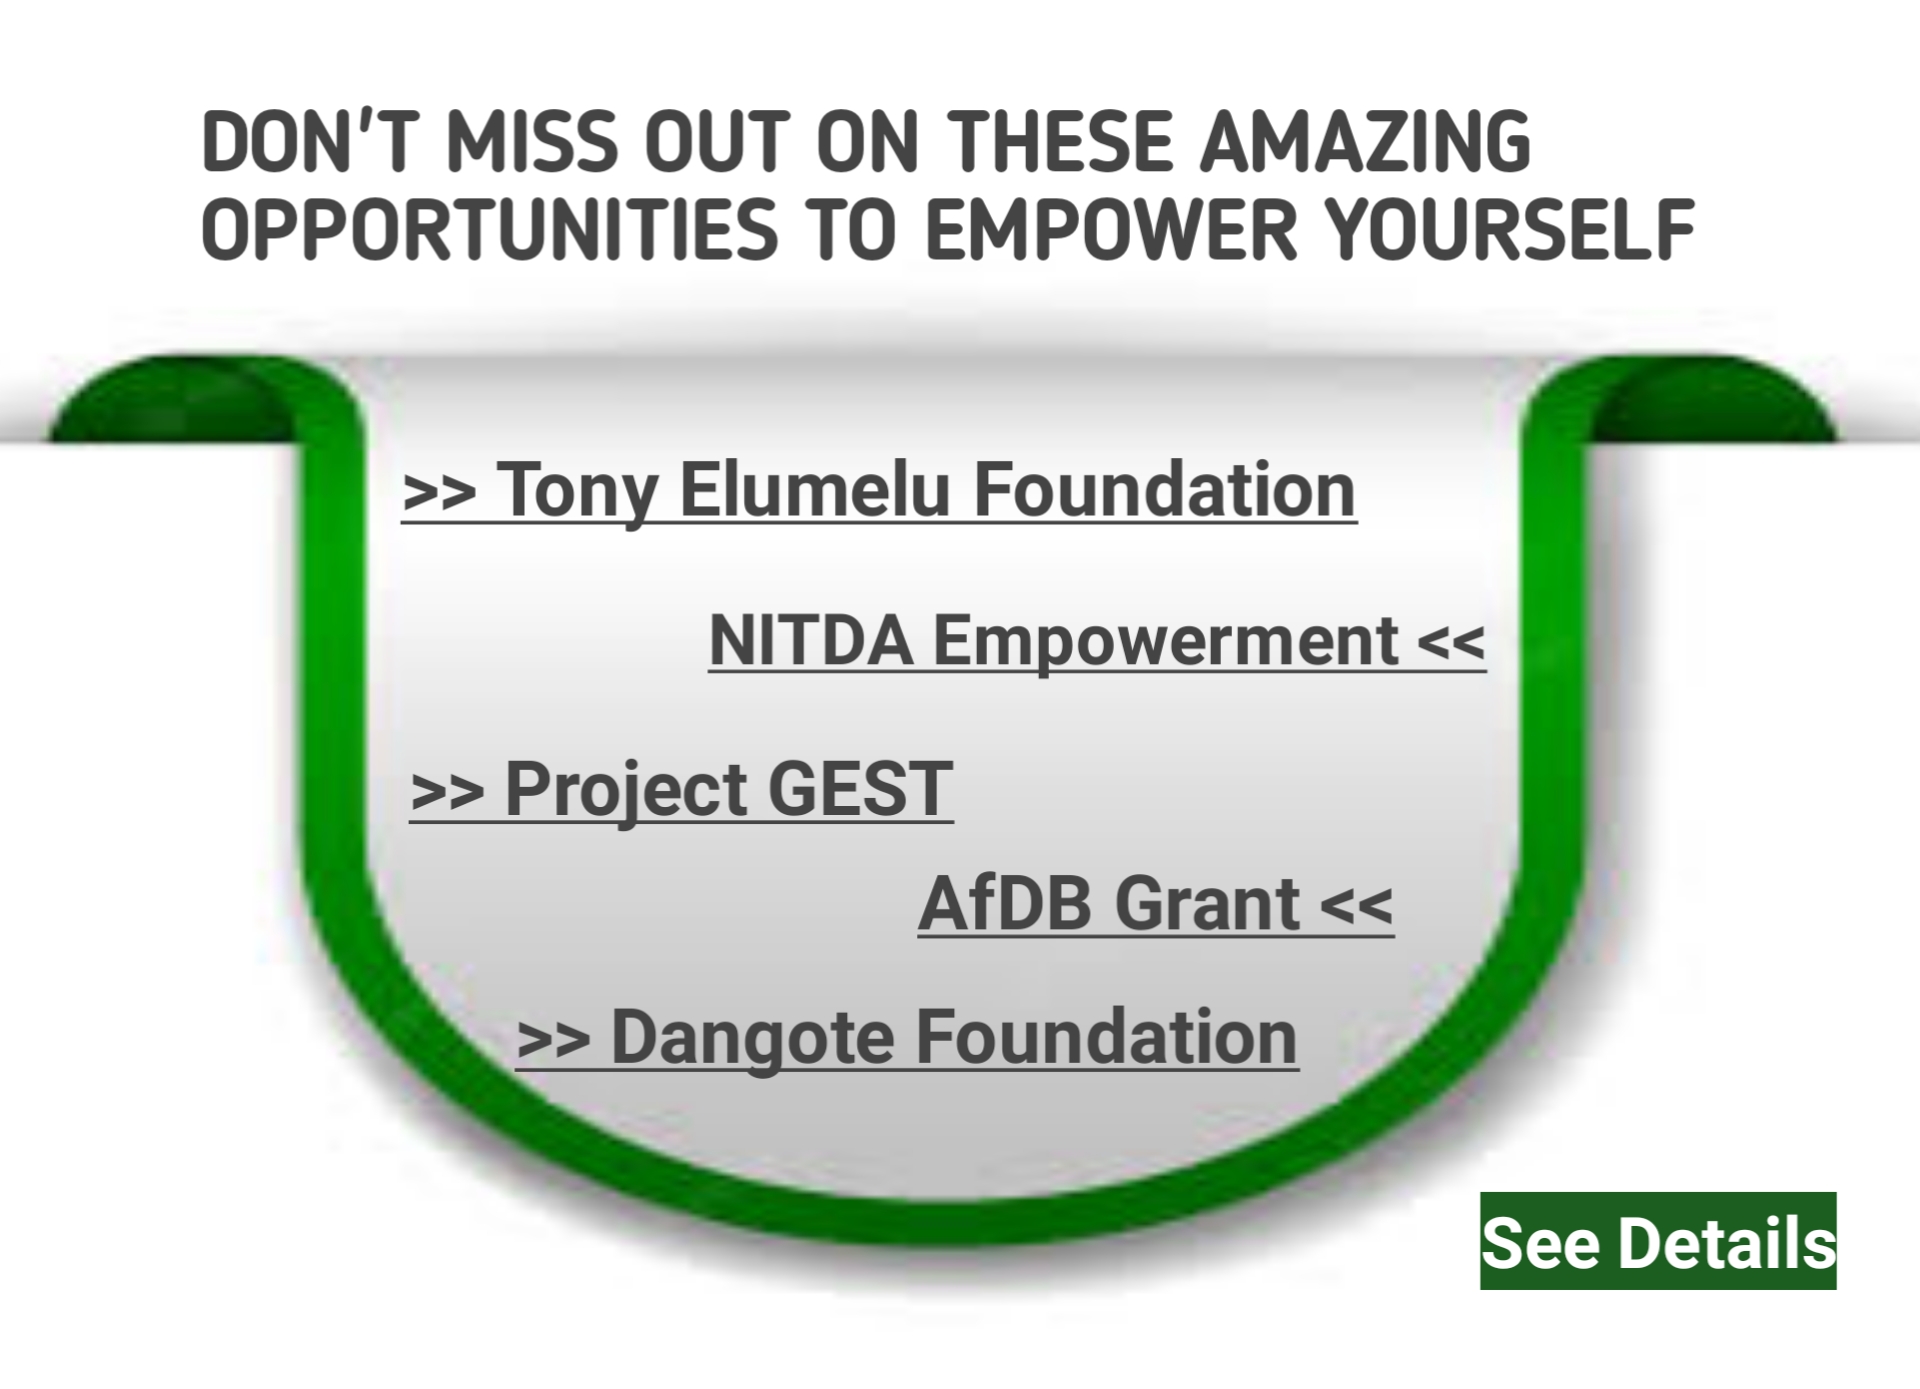 Don’t Miss Out on These Amazing Opportunities to Empower Yourself in Nigeria